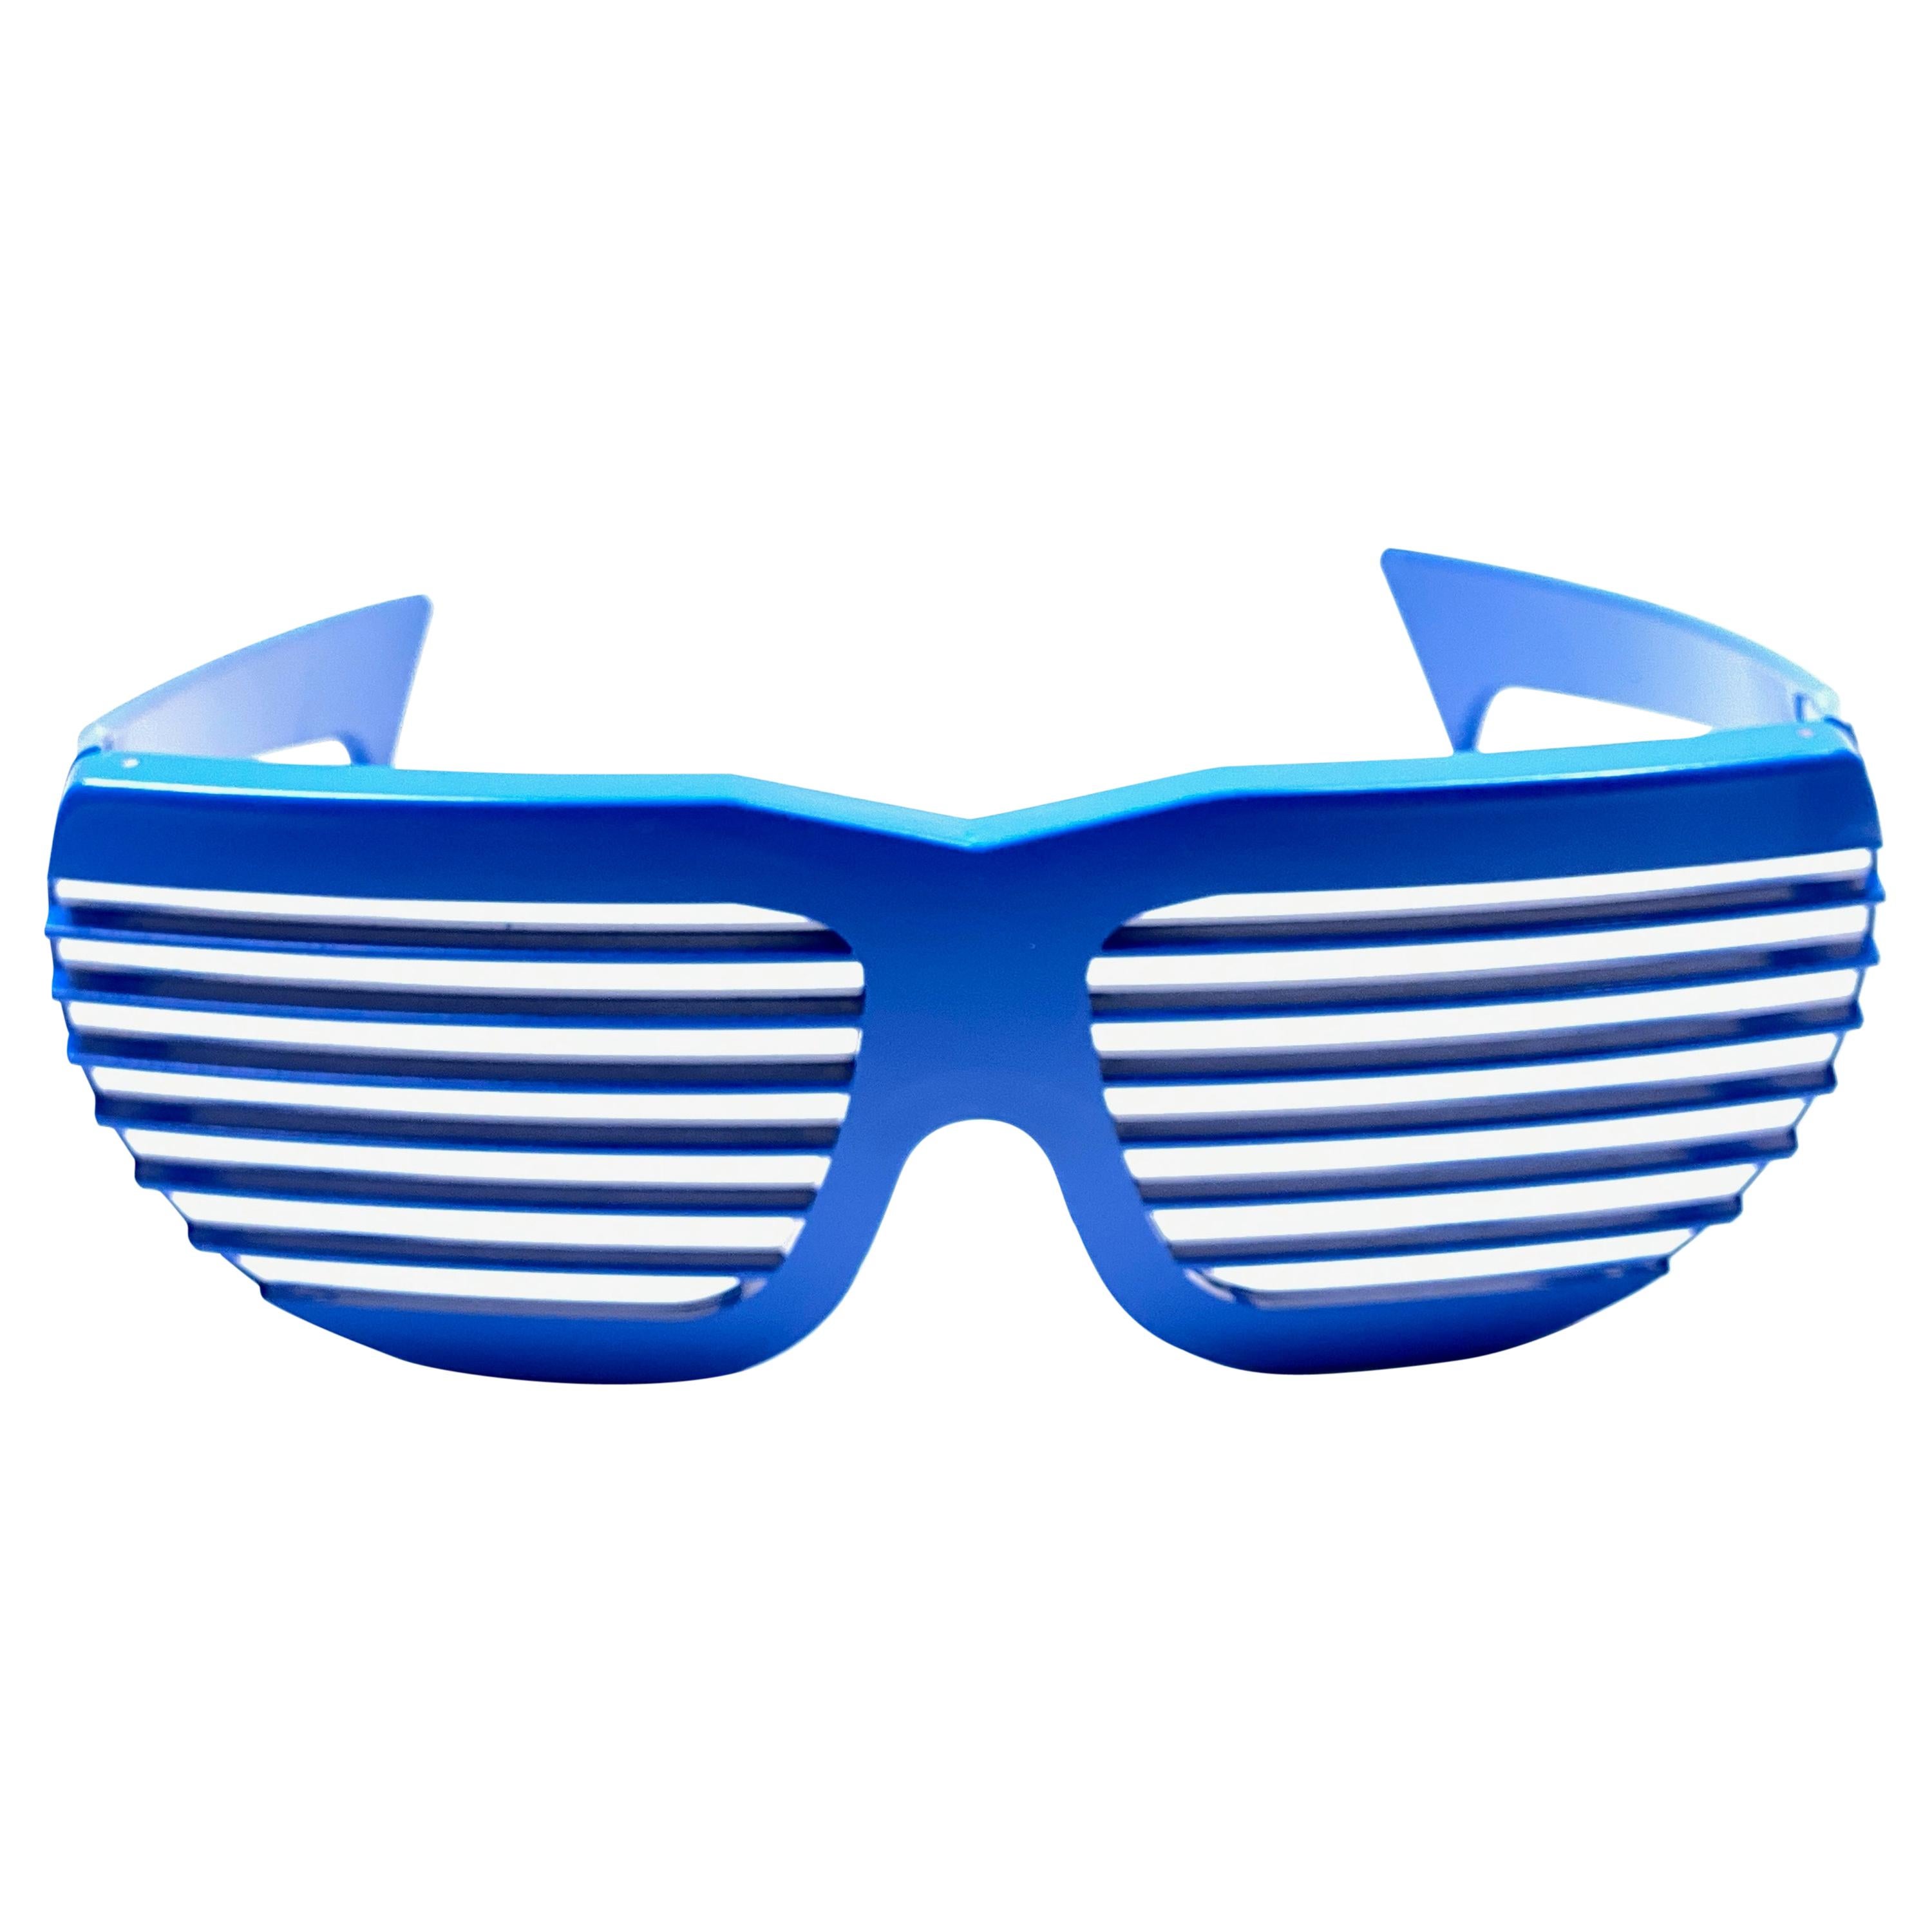 New Vintage Volpini Blue Shutter Shades Sunglasses 1980's Made in France